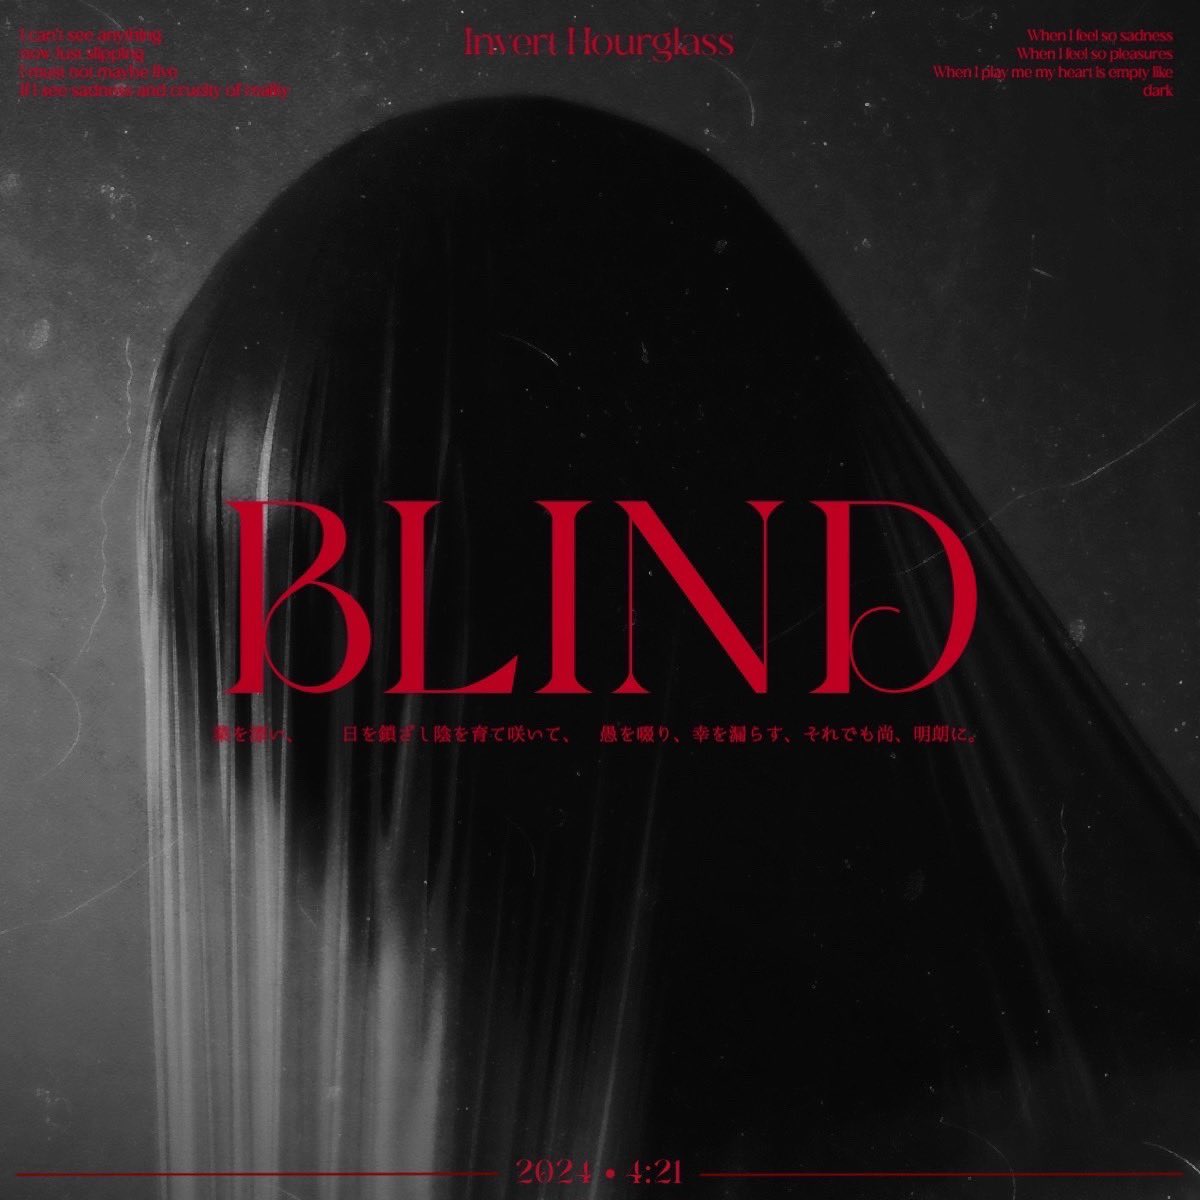 【⌛️New Song Info⌛️】 2024/01/20(sat) 0:00より New single「Blind」配信予定！ ▼配信URL▼ linkco.re/A9BmXgMH Artwork Designed by @Jkq3sIf